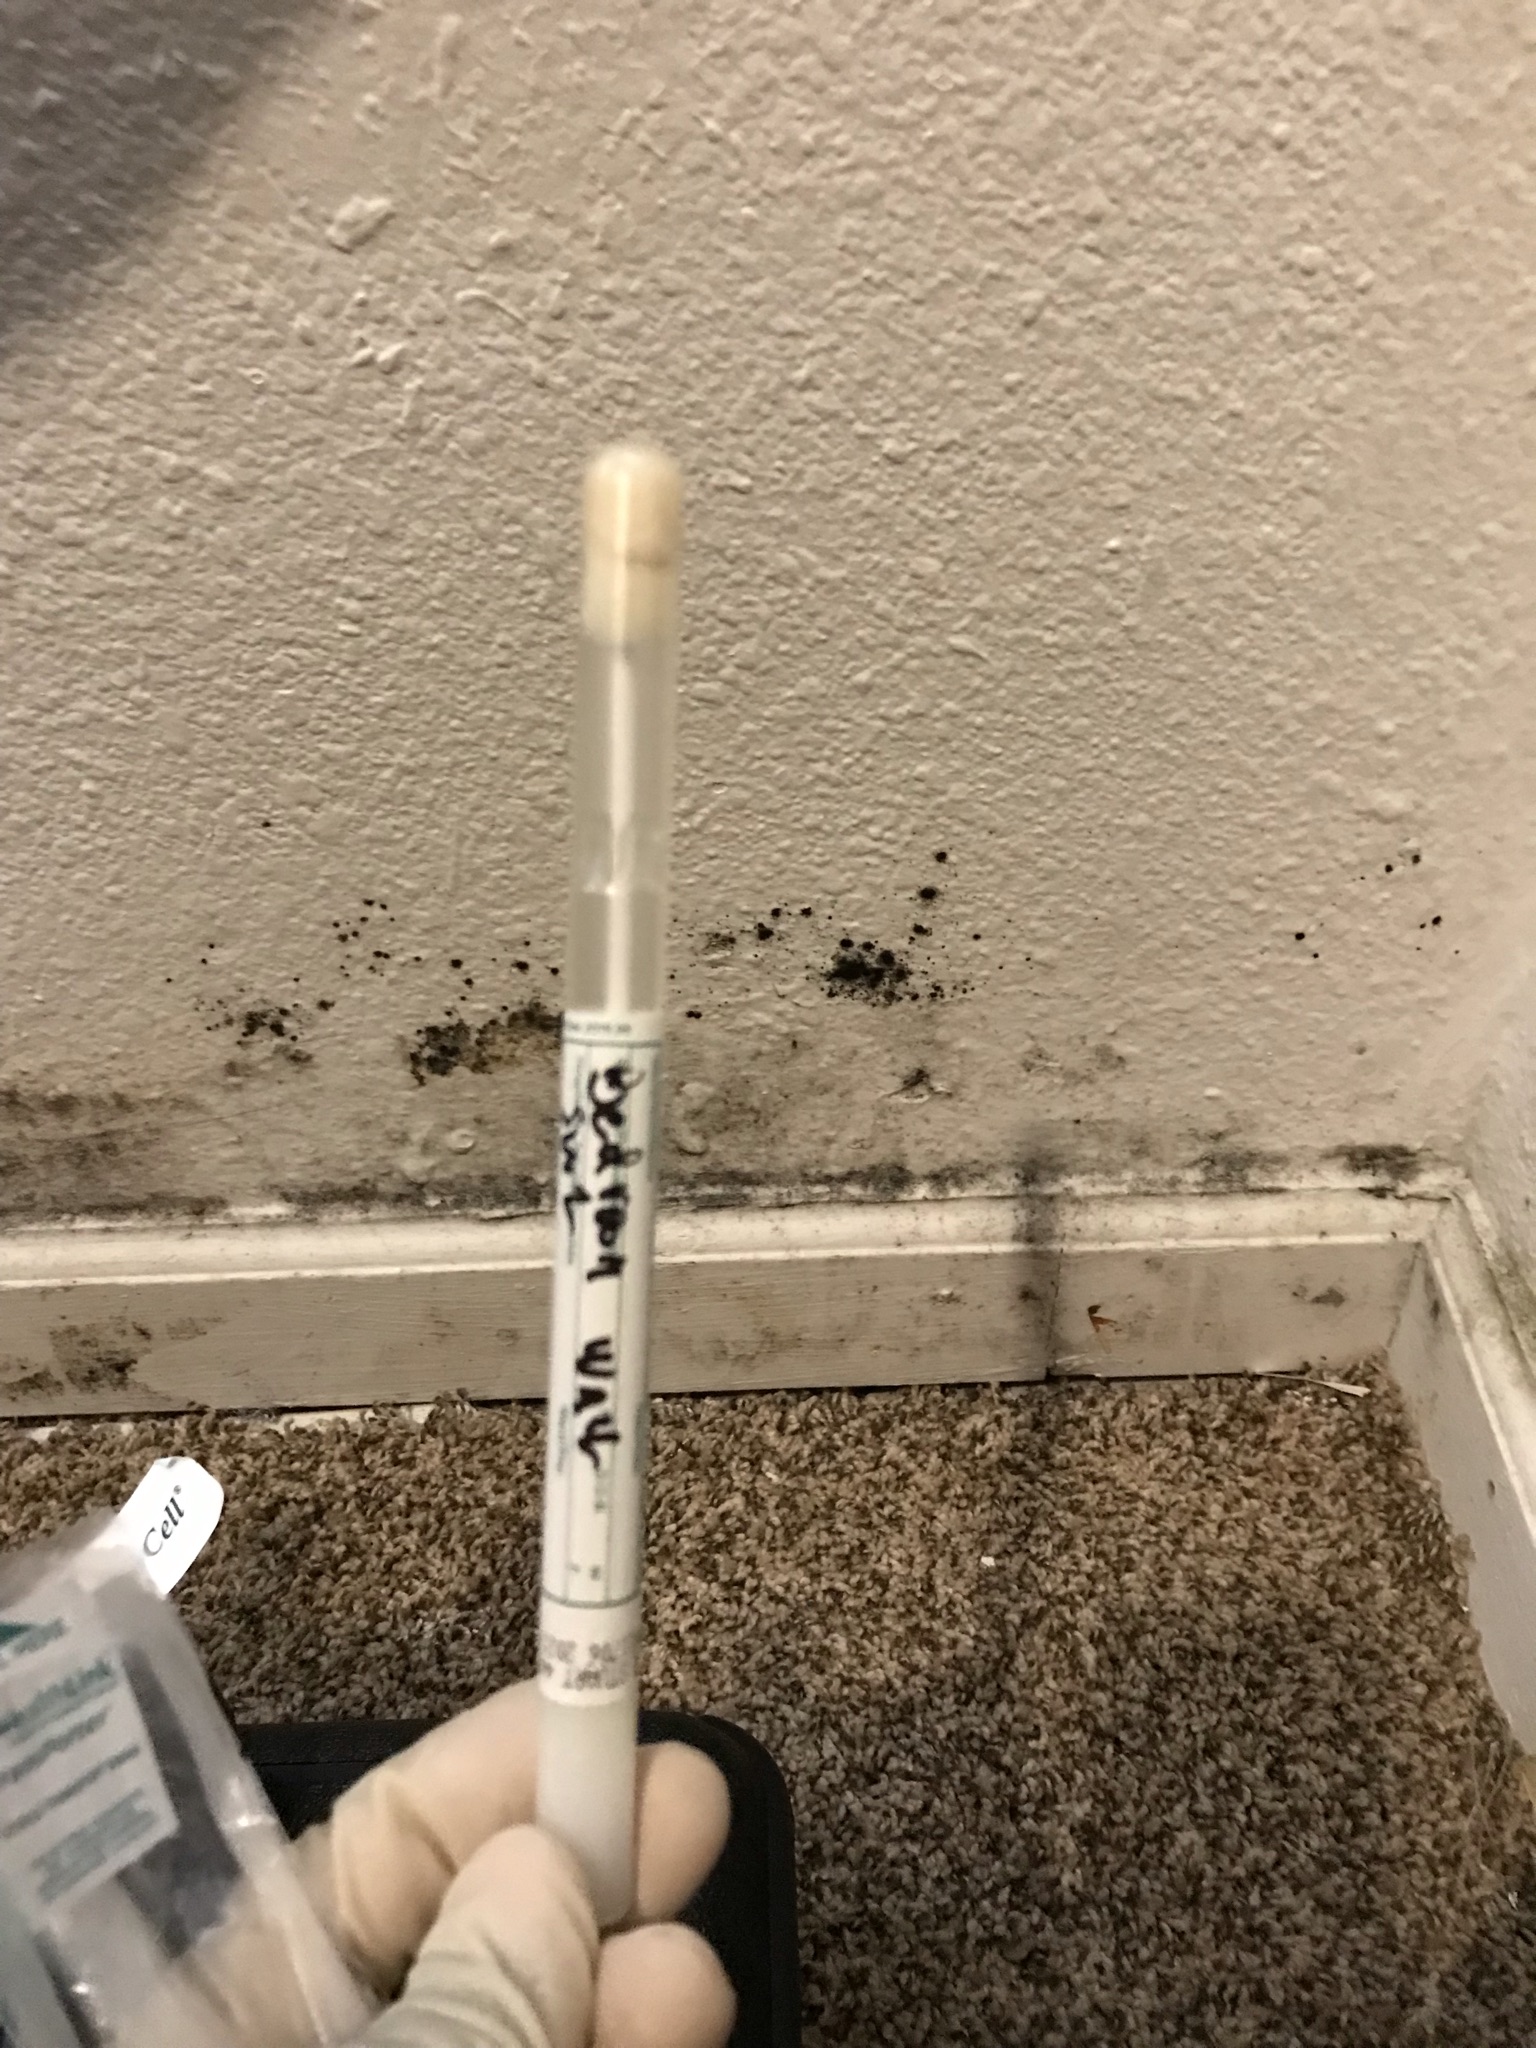 How to detect mold in my walls